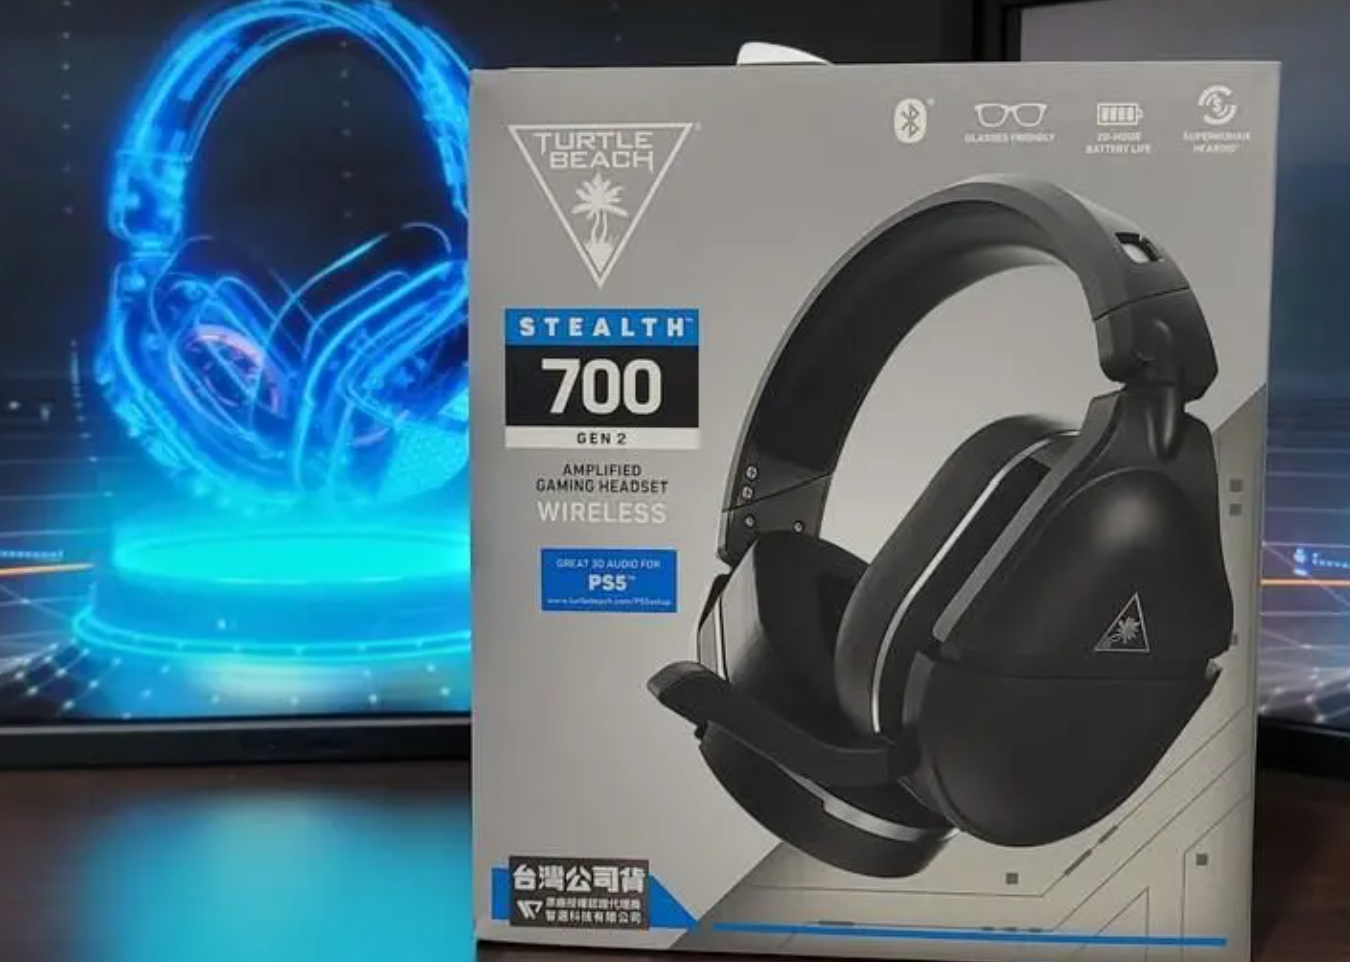 Turtle Beach Stealth 700 Gen 2 Wireless Gaming Headset: Superior Audio for Total Gaming Immersion